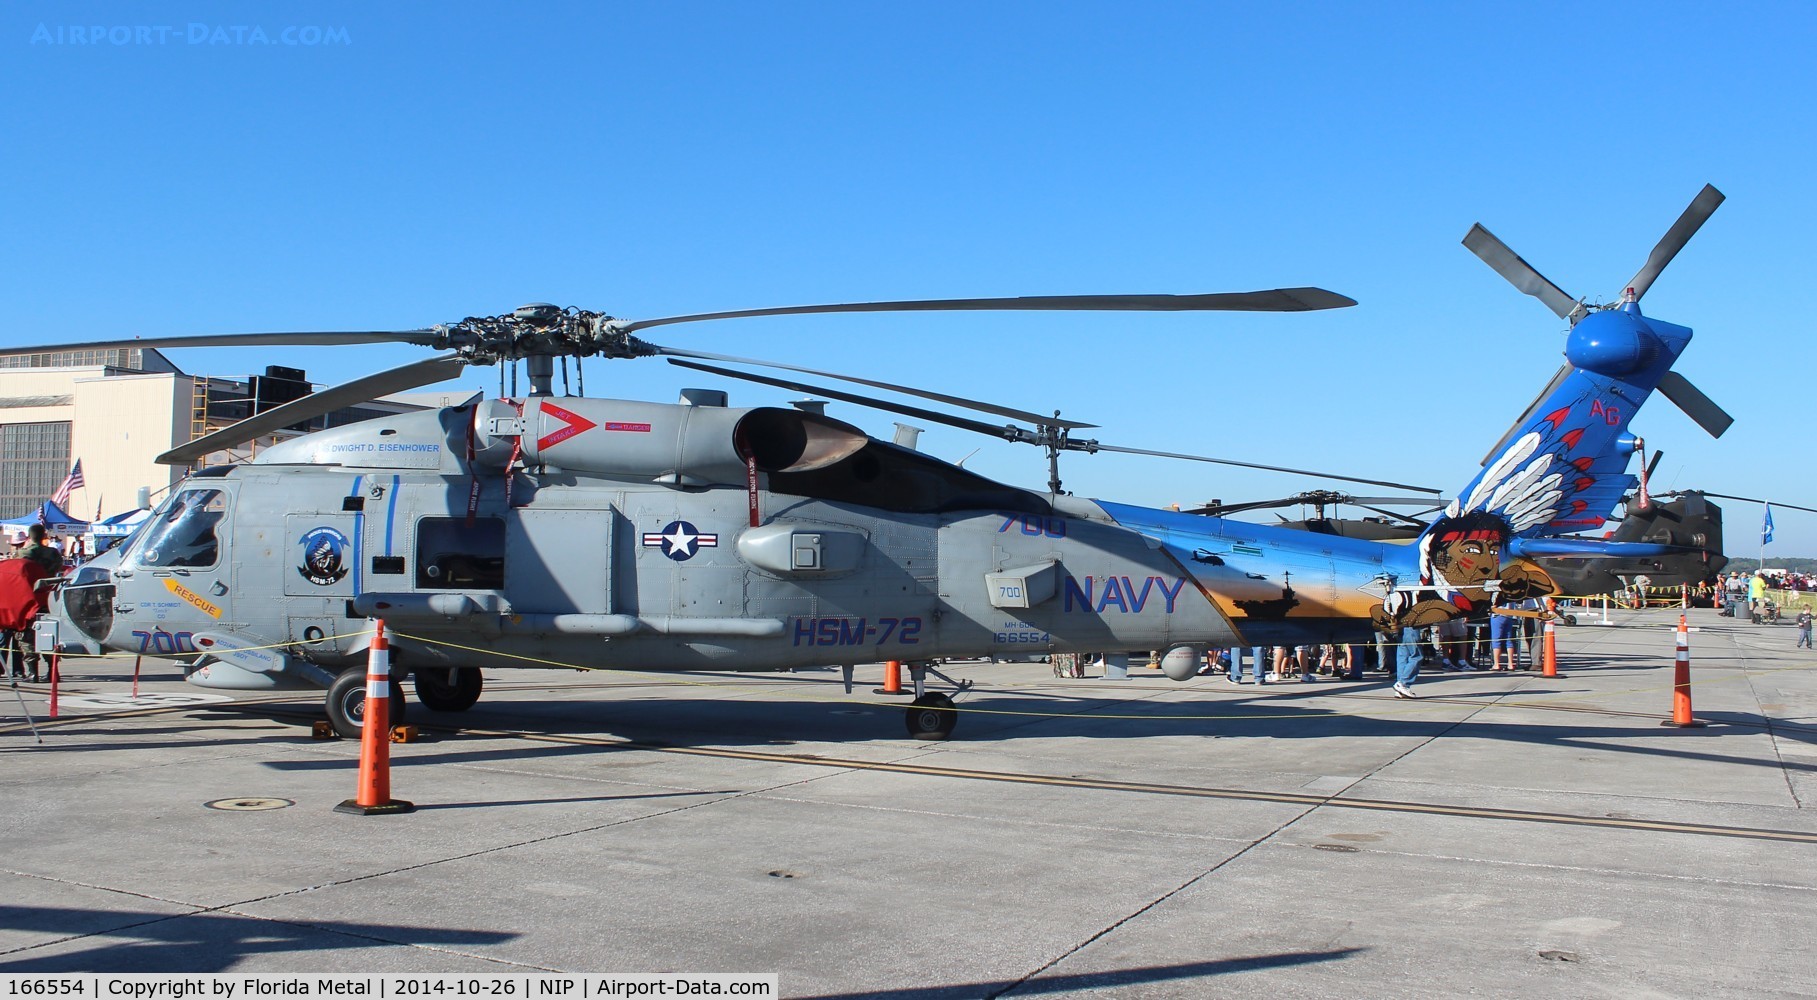 166554, Sikorsky MH-60R Seahawk C/N 703150, MH-60R special paint